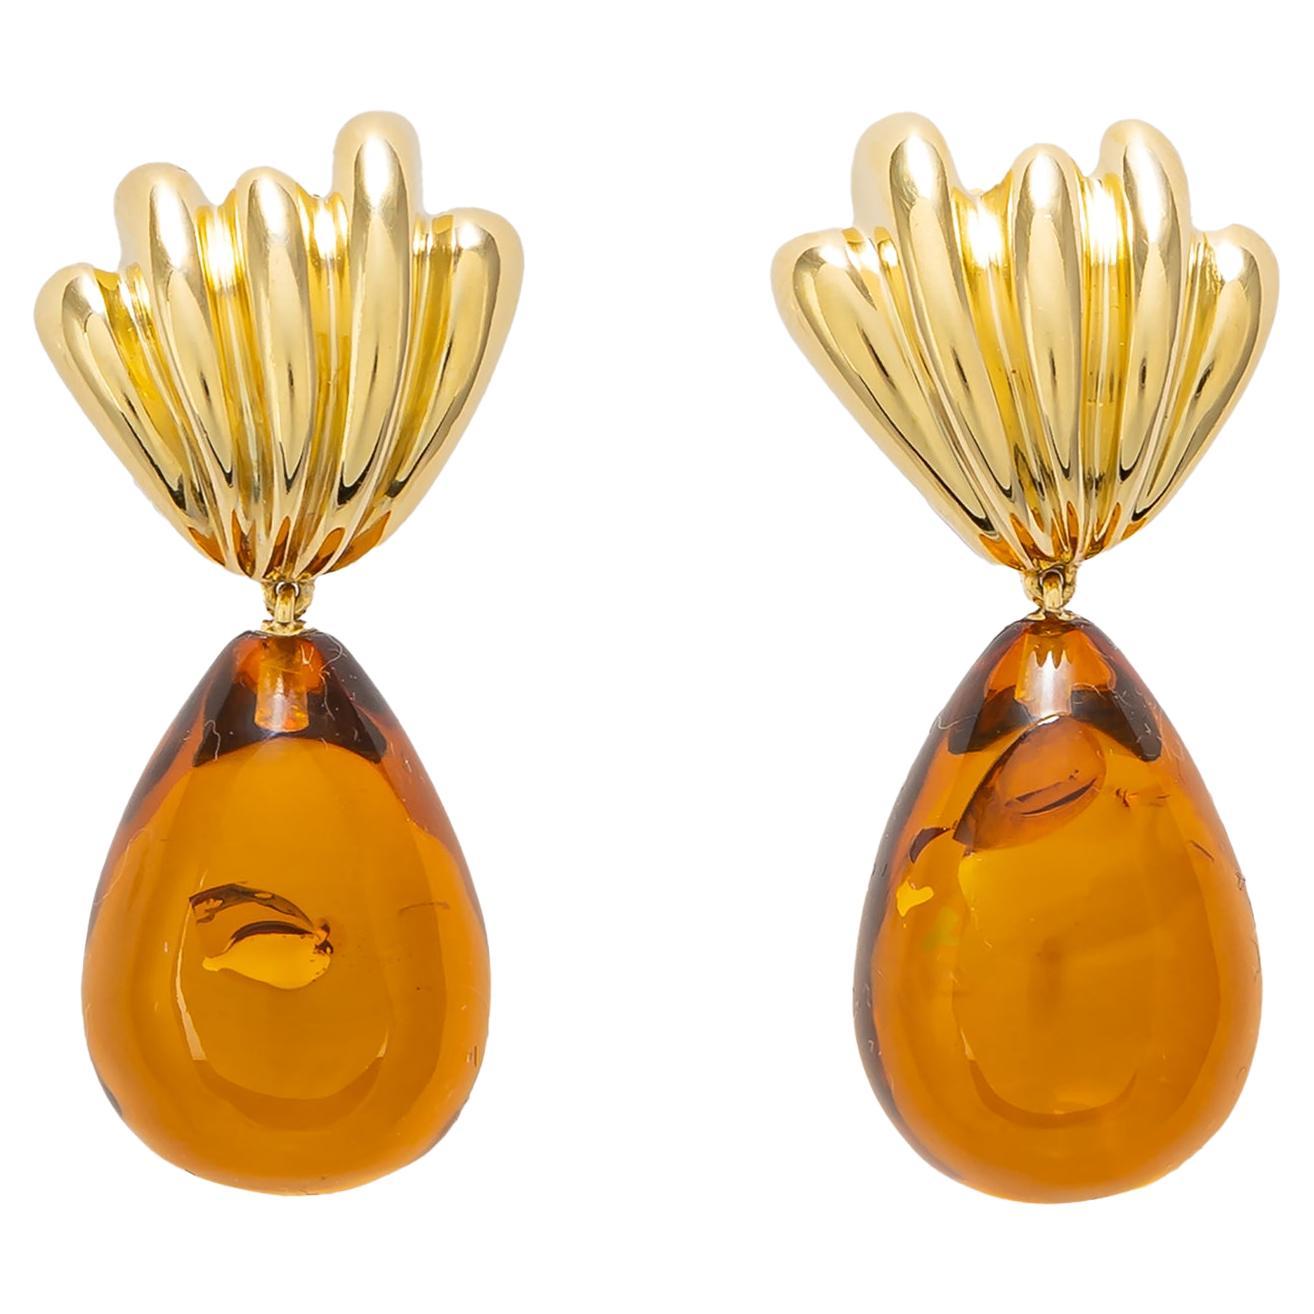 Tiffany & Co. Gold and Amber Drop Earrings